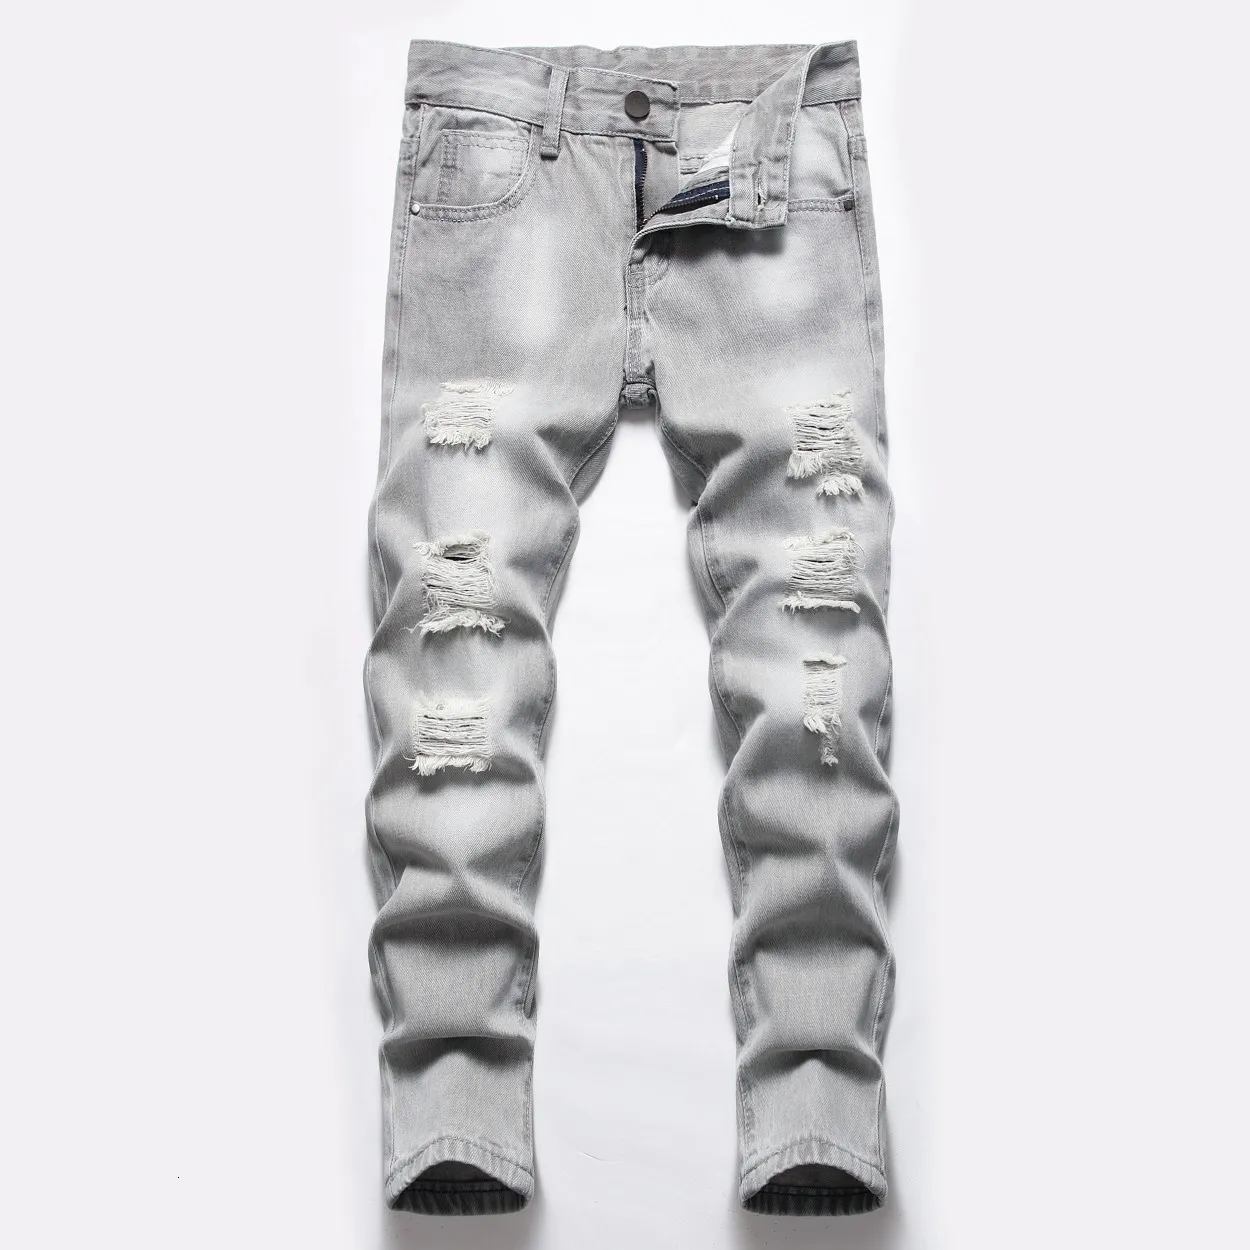 Jeans Boys 'Grey Straightleg Ripped Children Washed Distressed Stretch Denim Truussers Big Kids Casual Pants 516y 230920